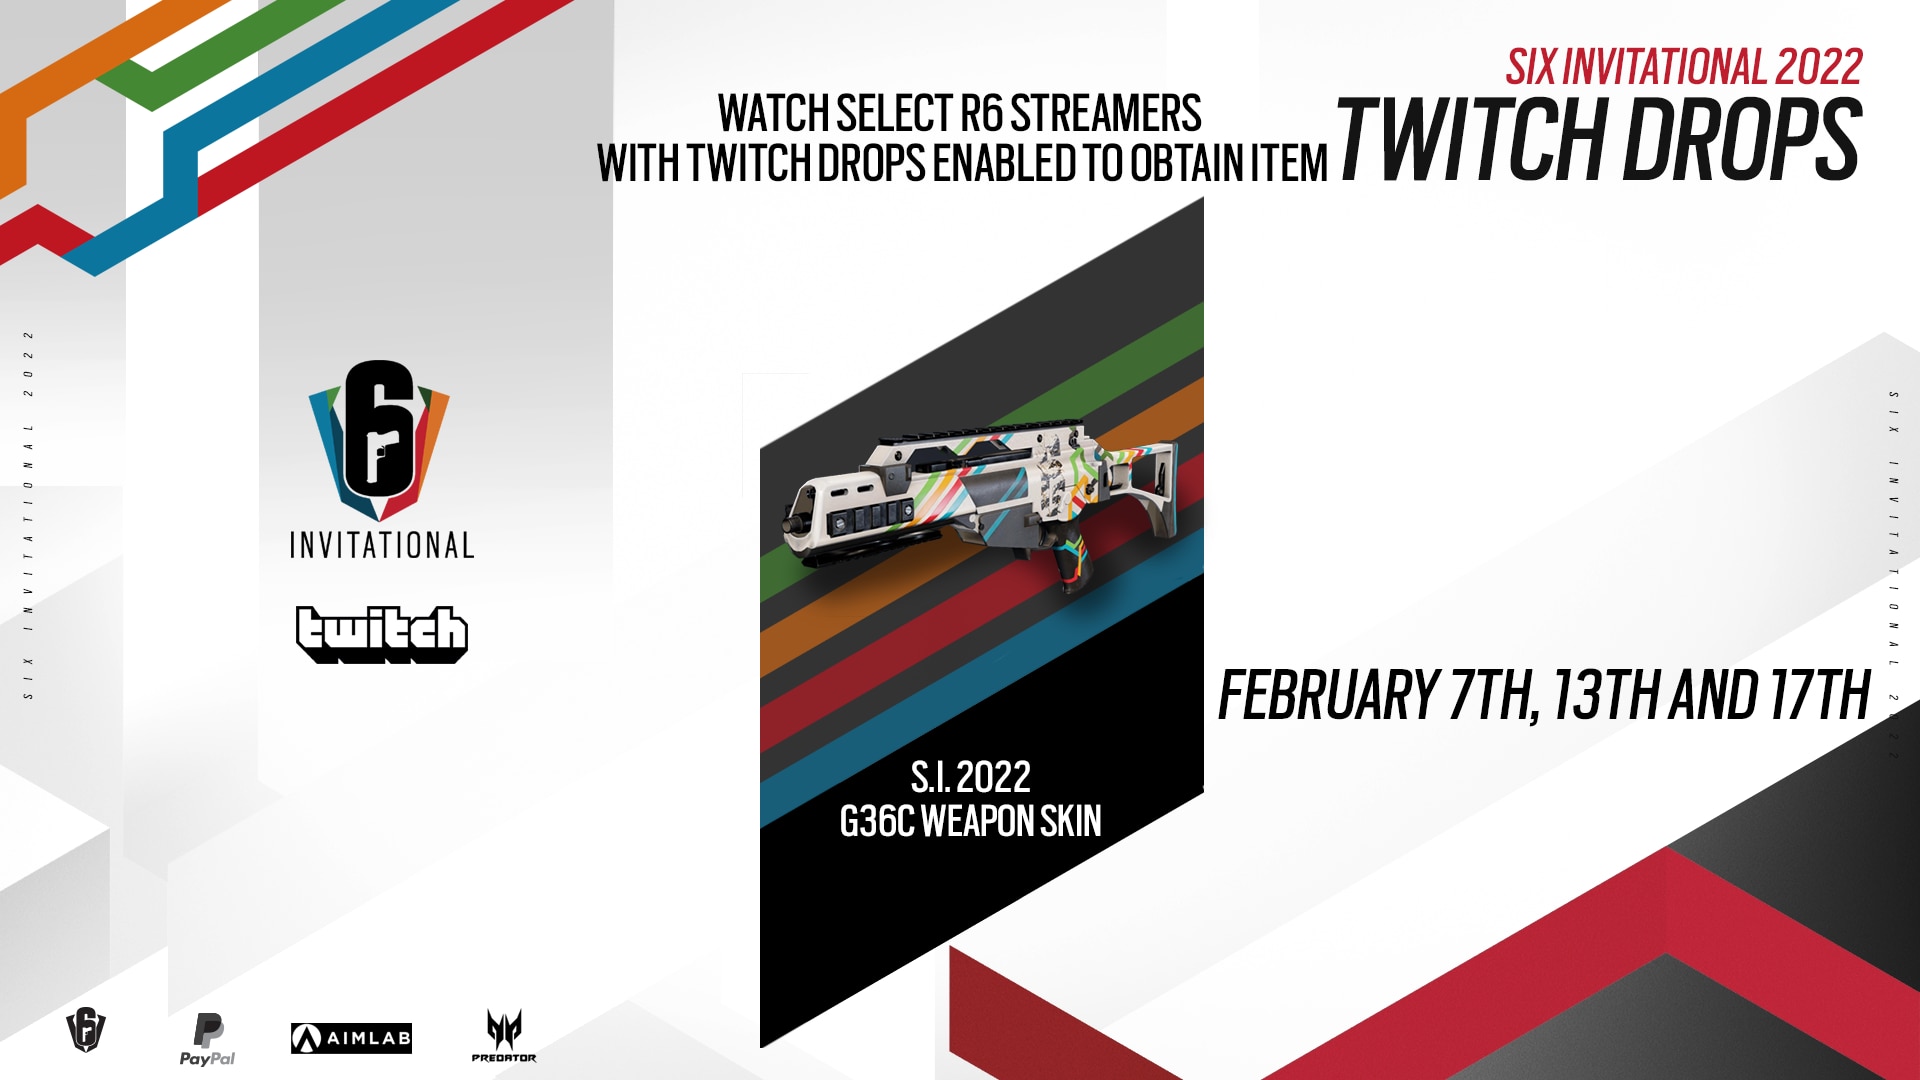 [R6SE] - Introducing the Twitch Drops Program for the Six Invitational 2022 - Exclusive Twitch Drops